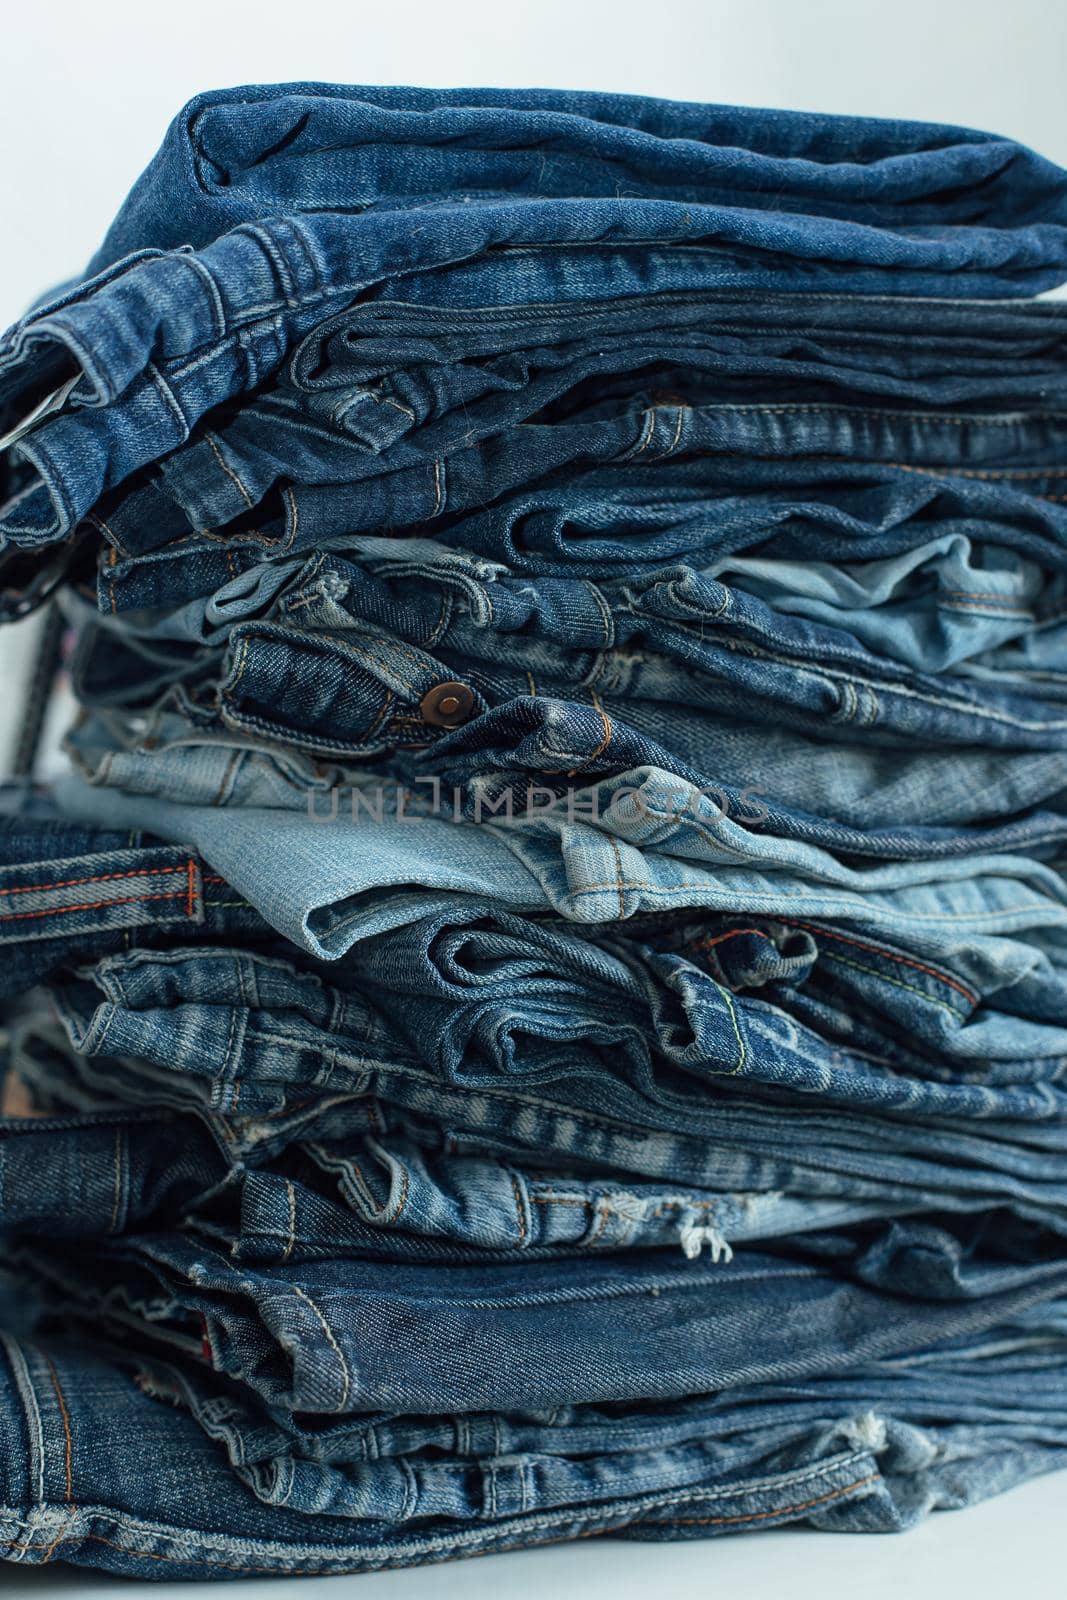 Stack of a stack of old jeans various shades of blue jeans. Denim jeans texture. Denim background texture for design. Canvas denim texture. by Smile19